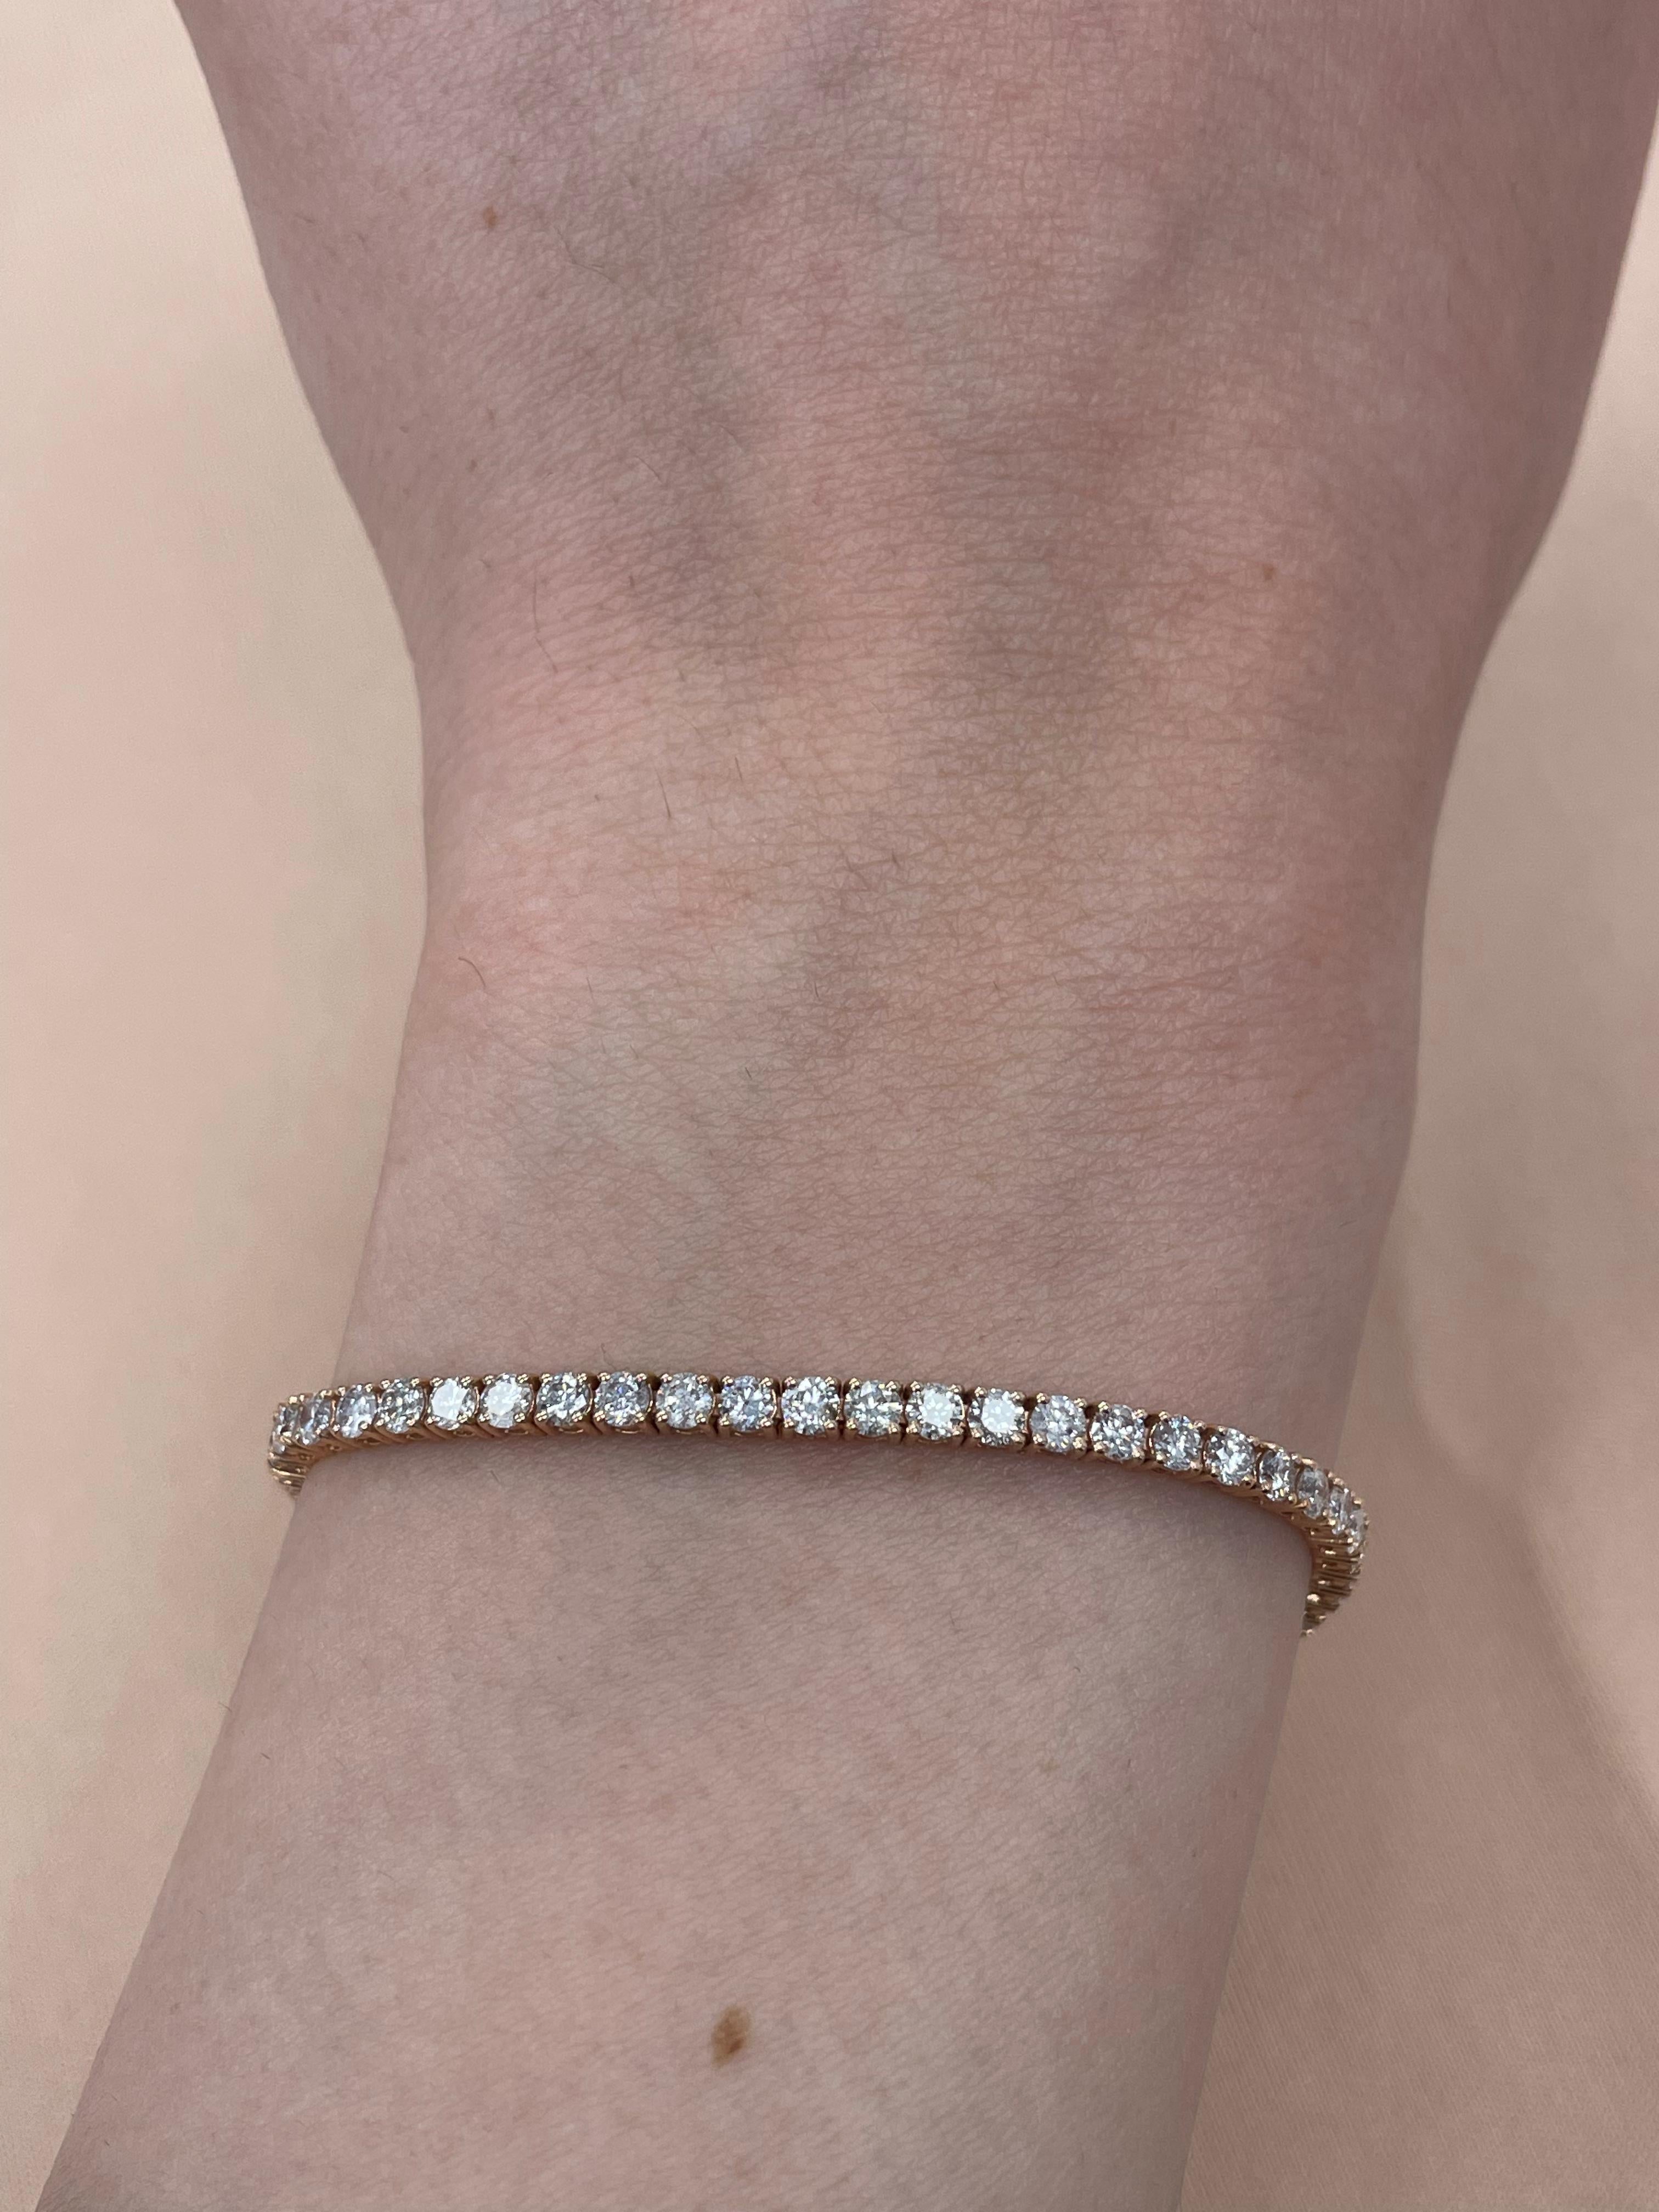 Exquisite and timeless diamonds tennis bracelet, by Alexander Beverly Hills.
66 round brilliant diamonds, 4.03 carats total. Approximately Very Light Pink color (looks like regular white diamonds in mounting) color and SI clarity. Four prong set in